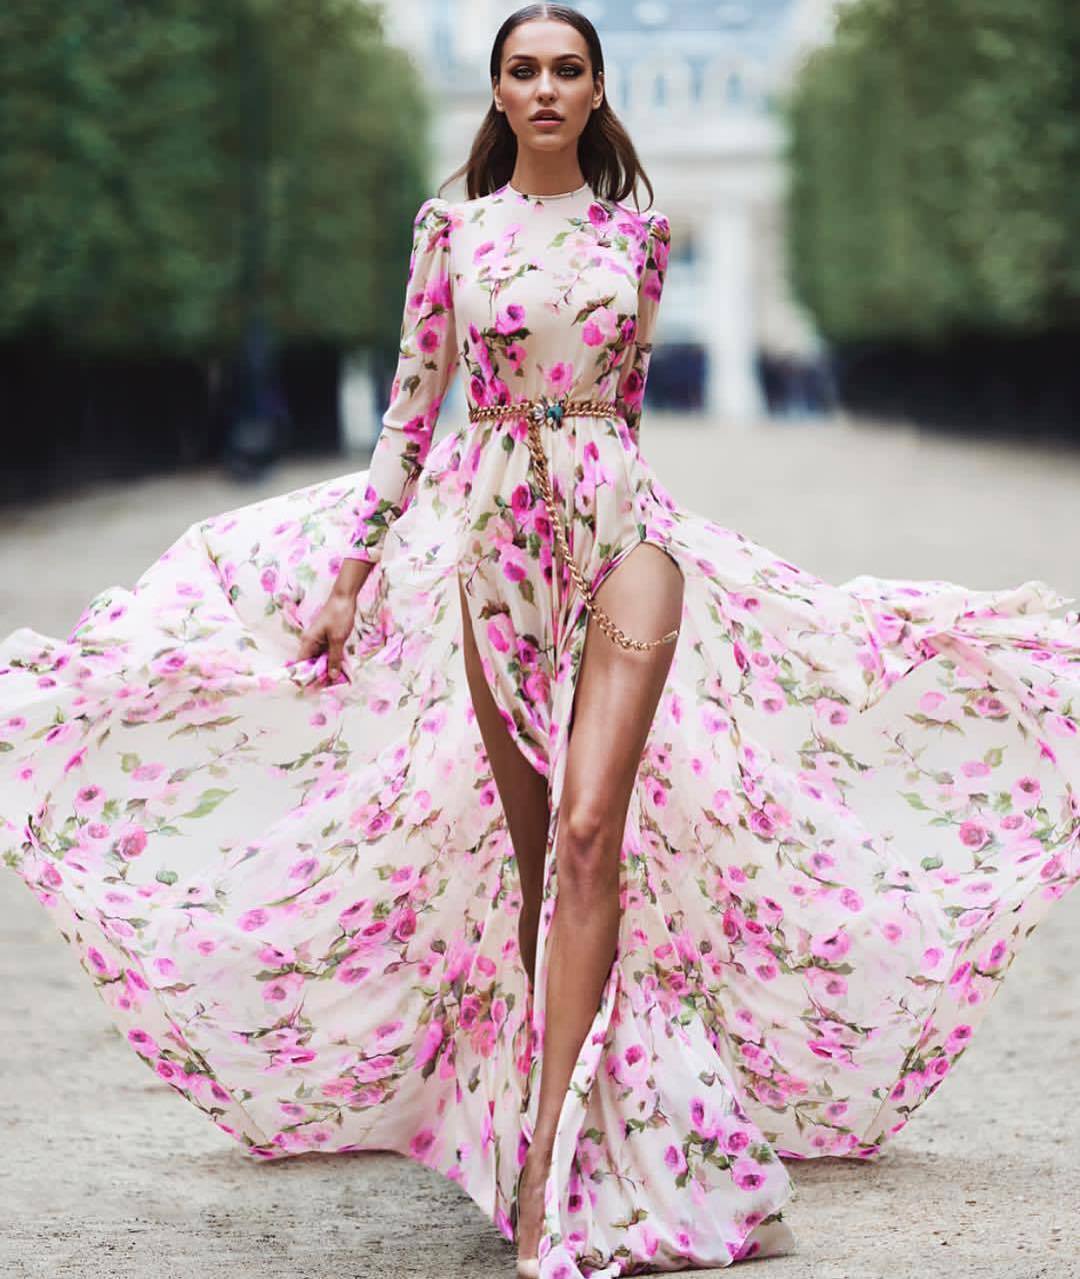 Wonen New Amazing Front Split Floral Print Long Maxi Dresses 2005-Maxi Dresses-Pink-S-Free Shipping at meselling99